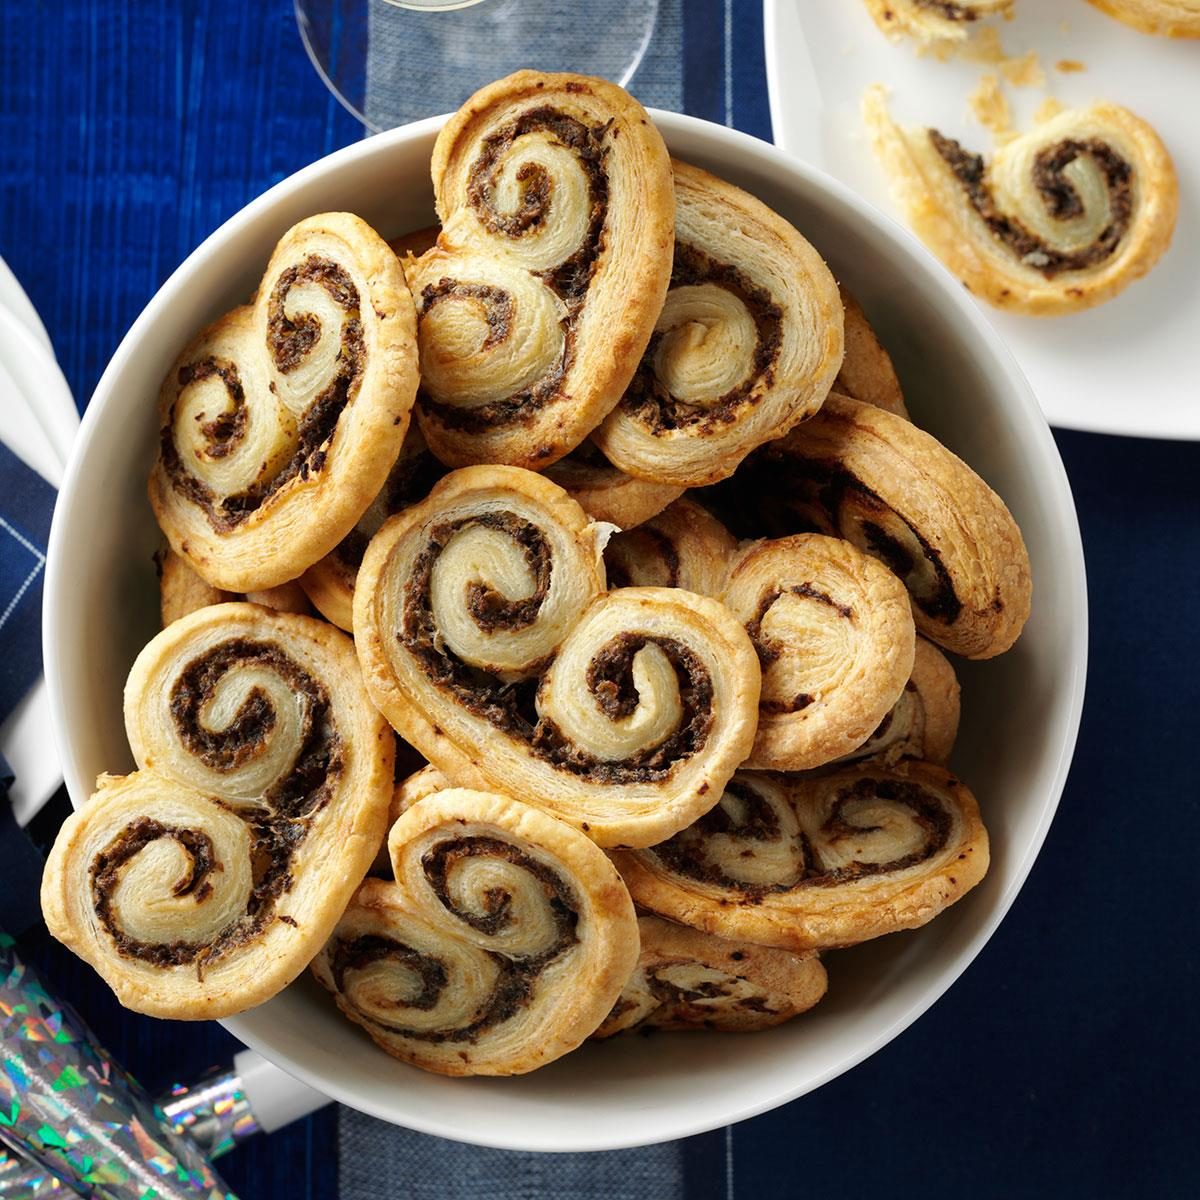 Inspired by Candice's Mushroom Palmiers